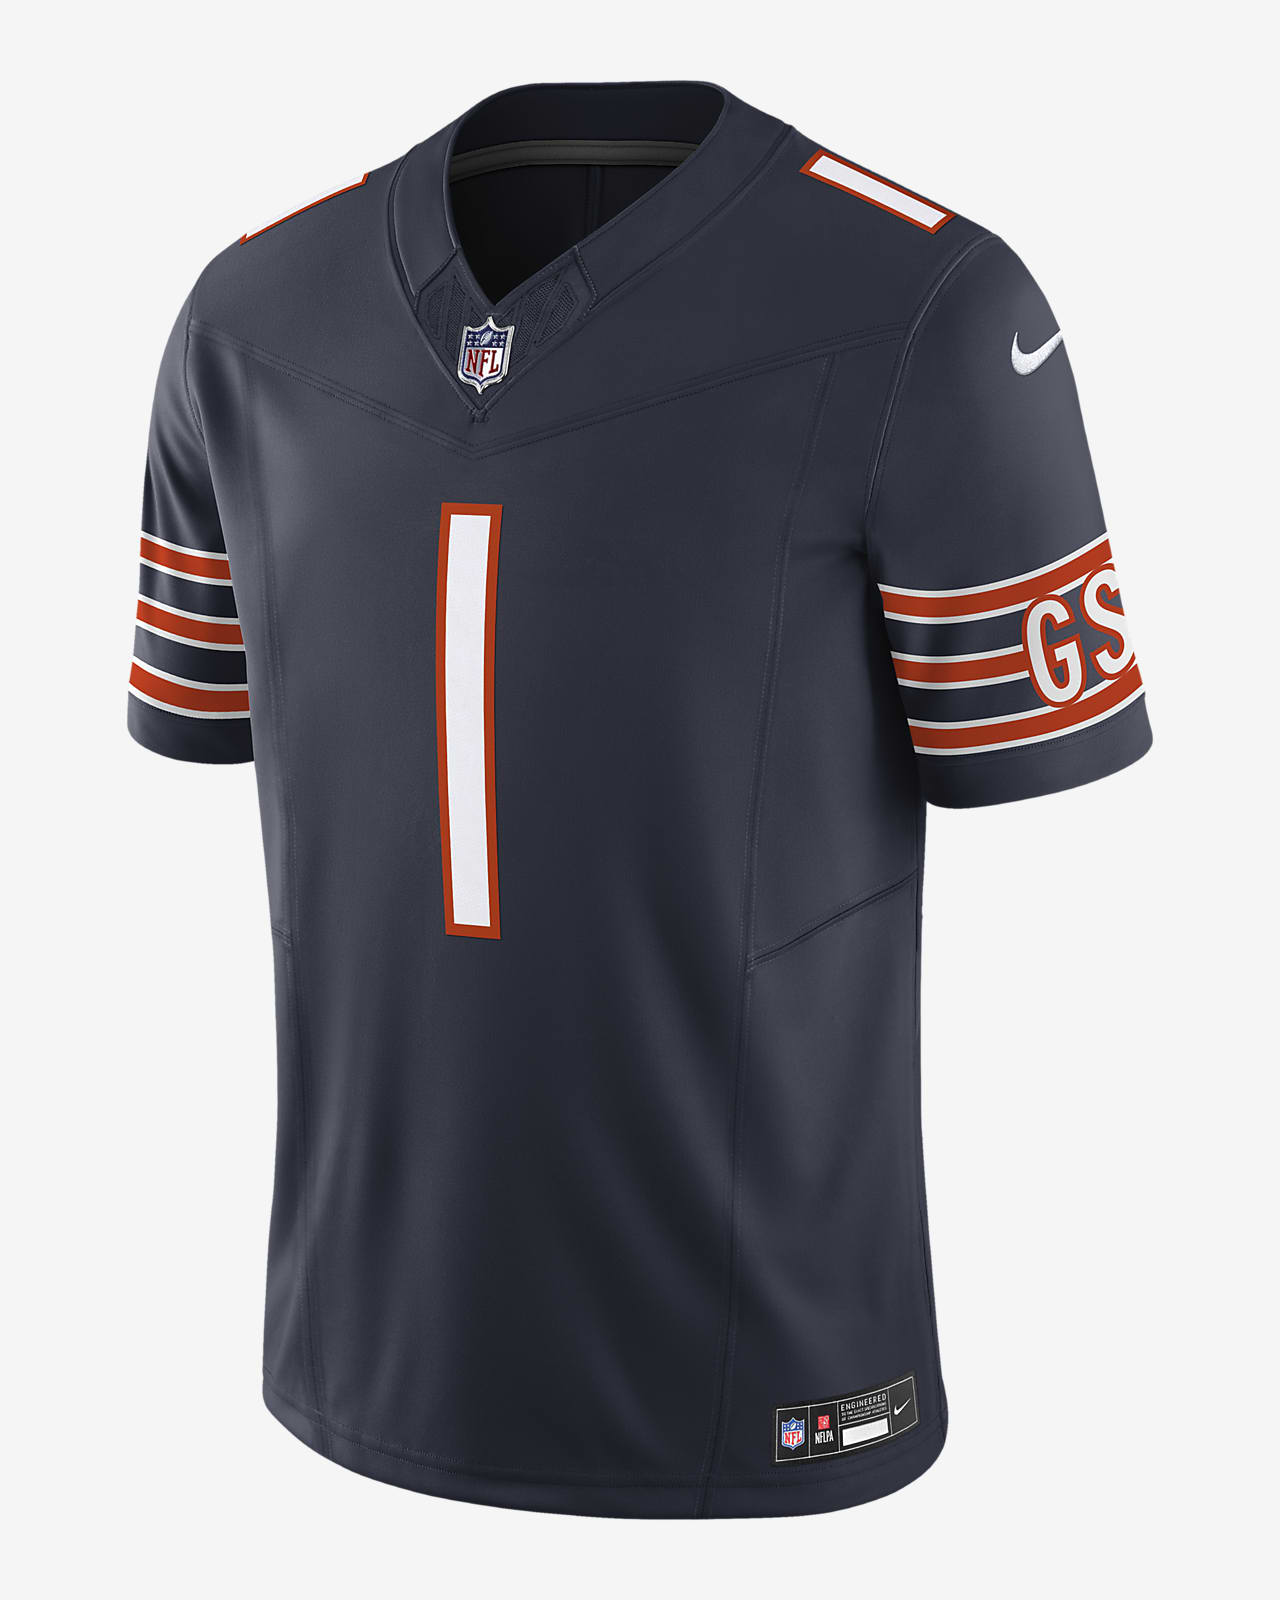 top selling chicago bears jersey